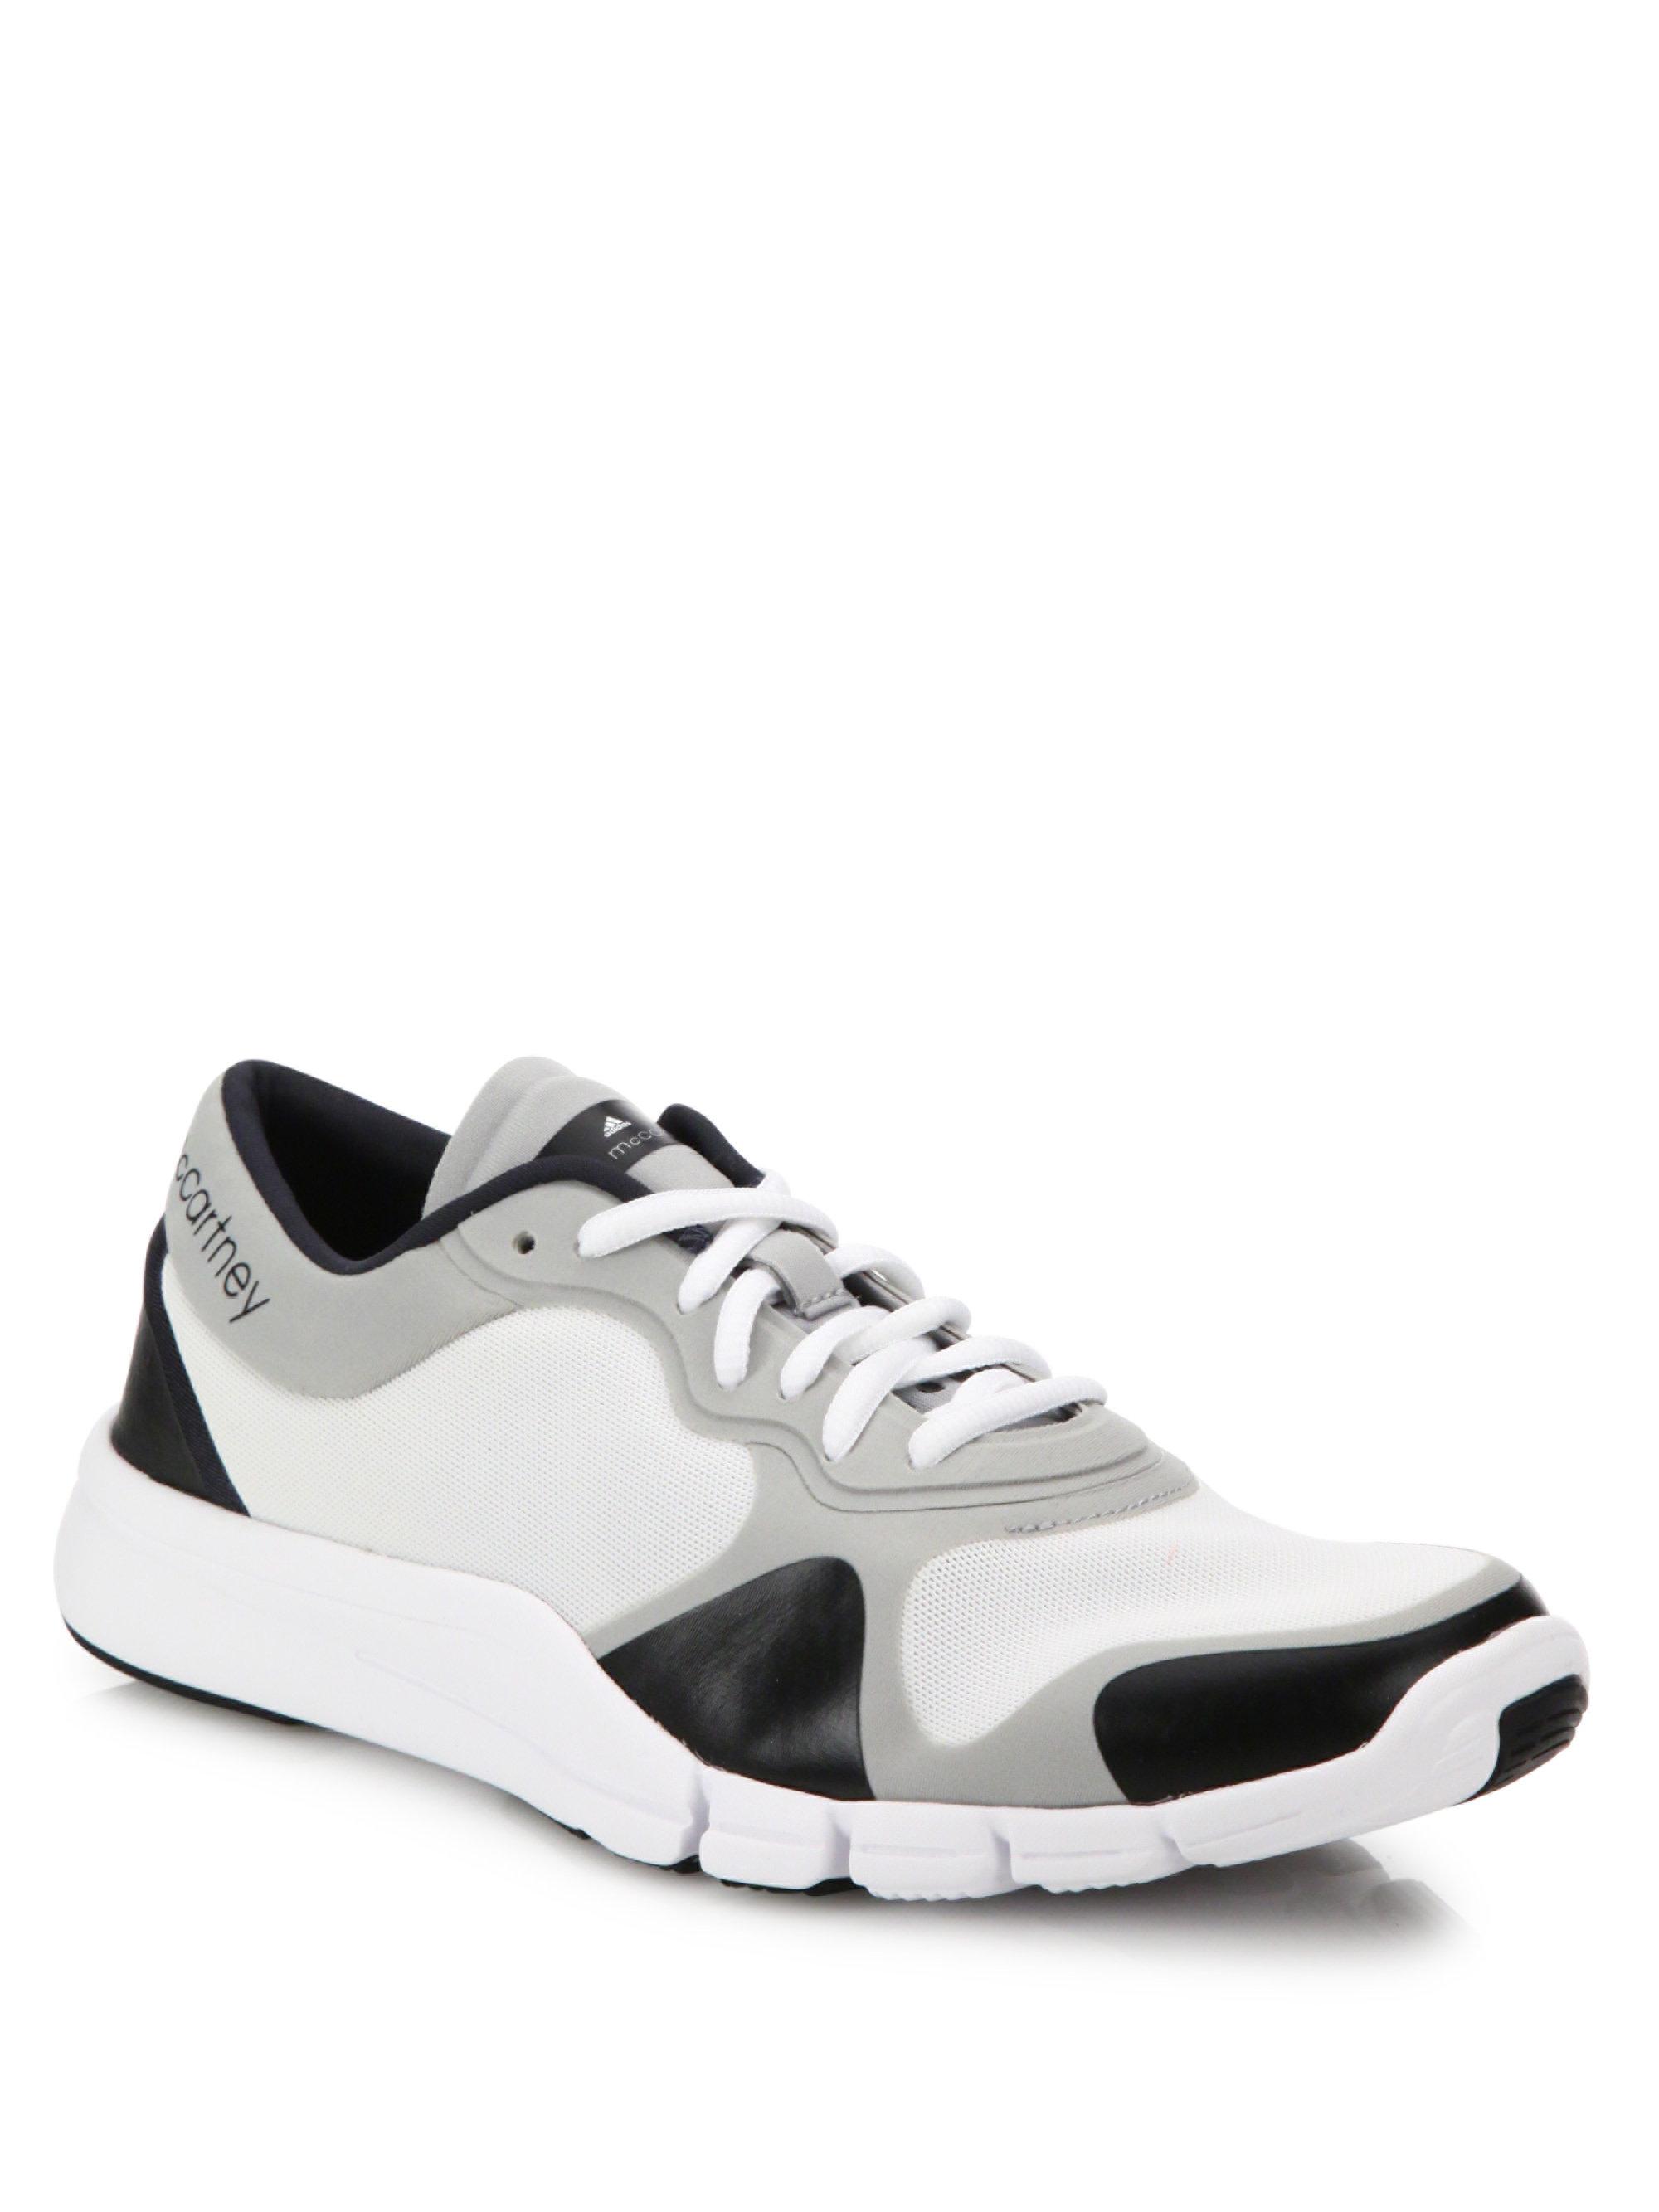 adidas By Stella McCartney Adipure Trainer Sneakers in Grey (Gray) | Lyst